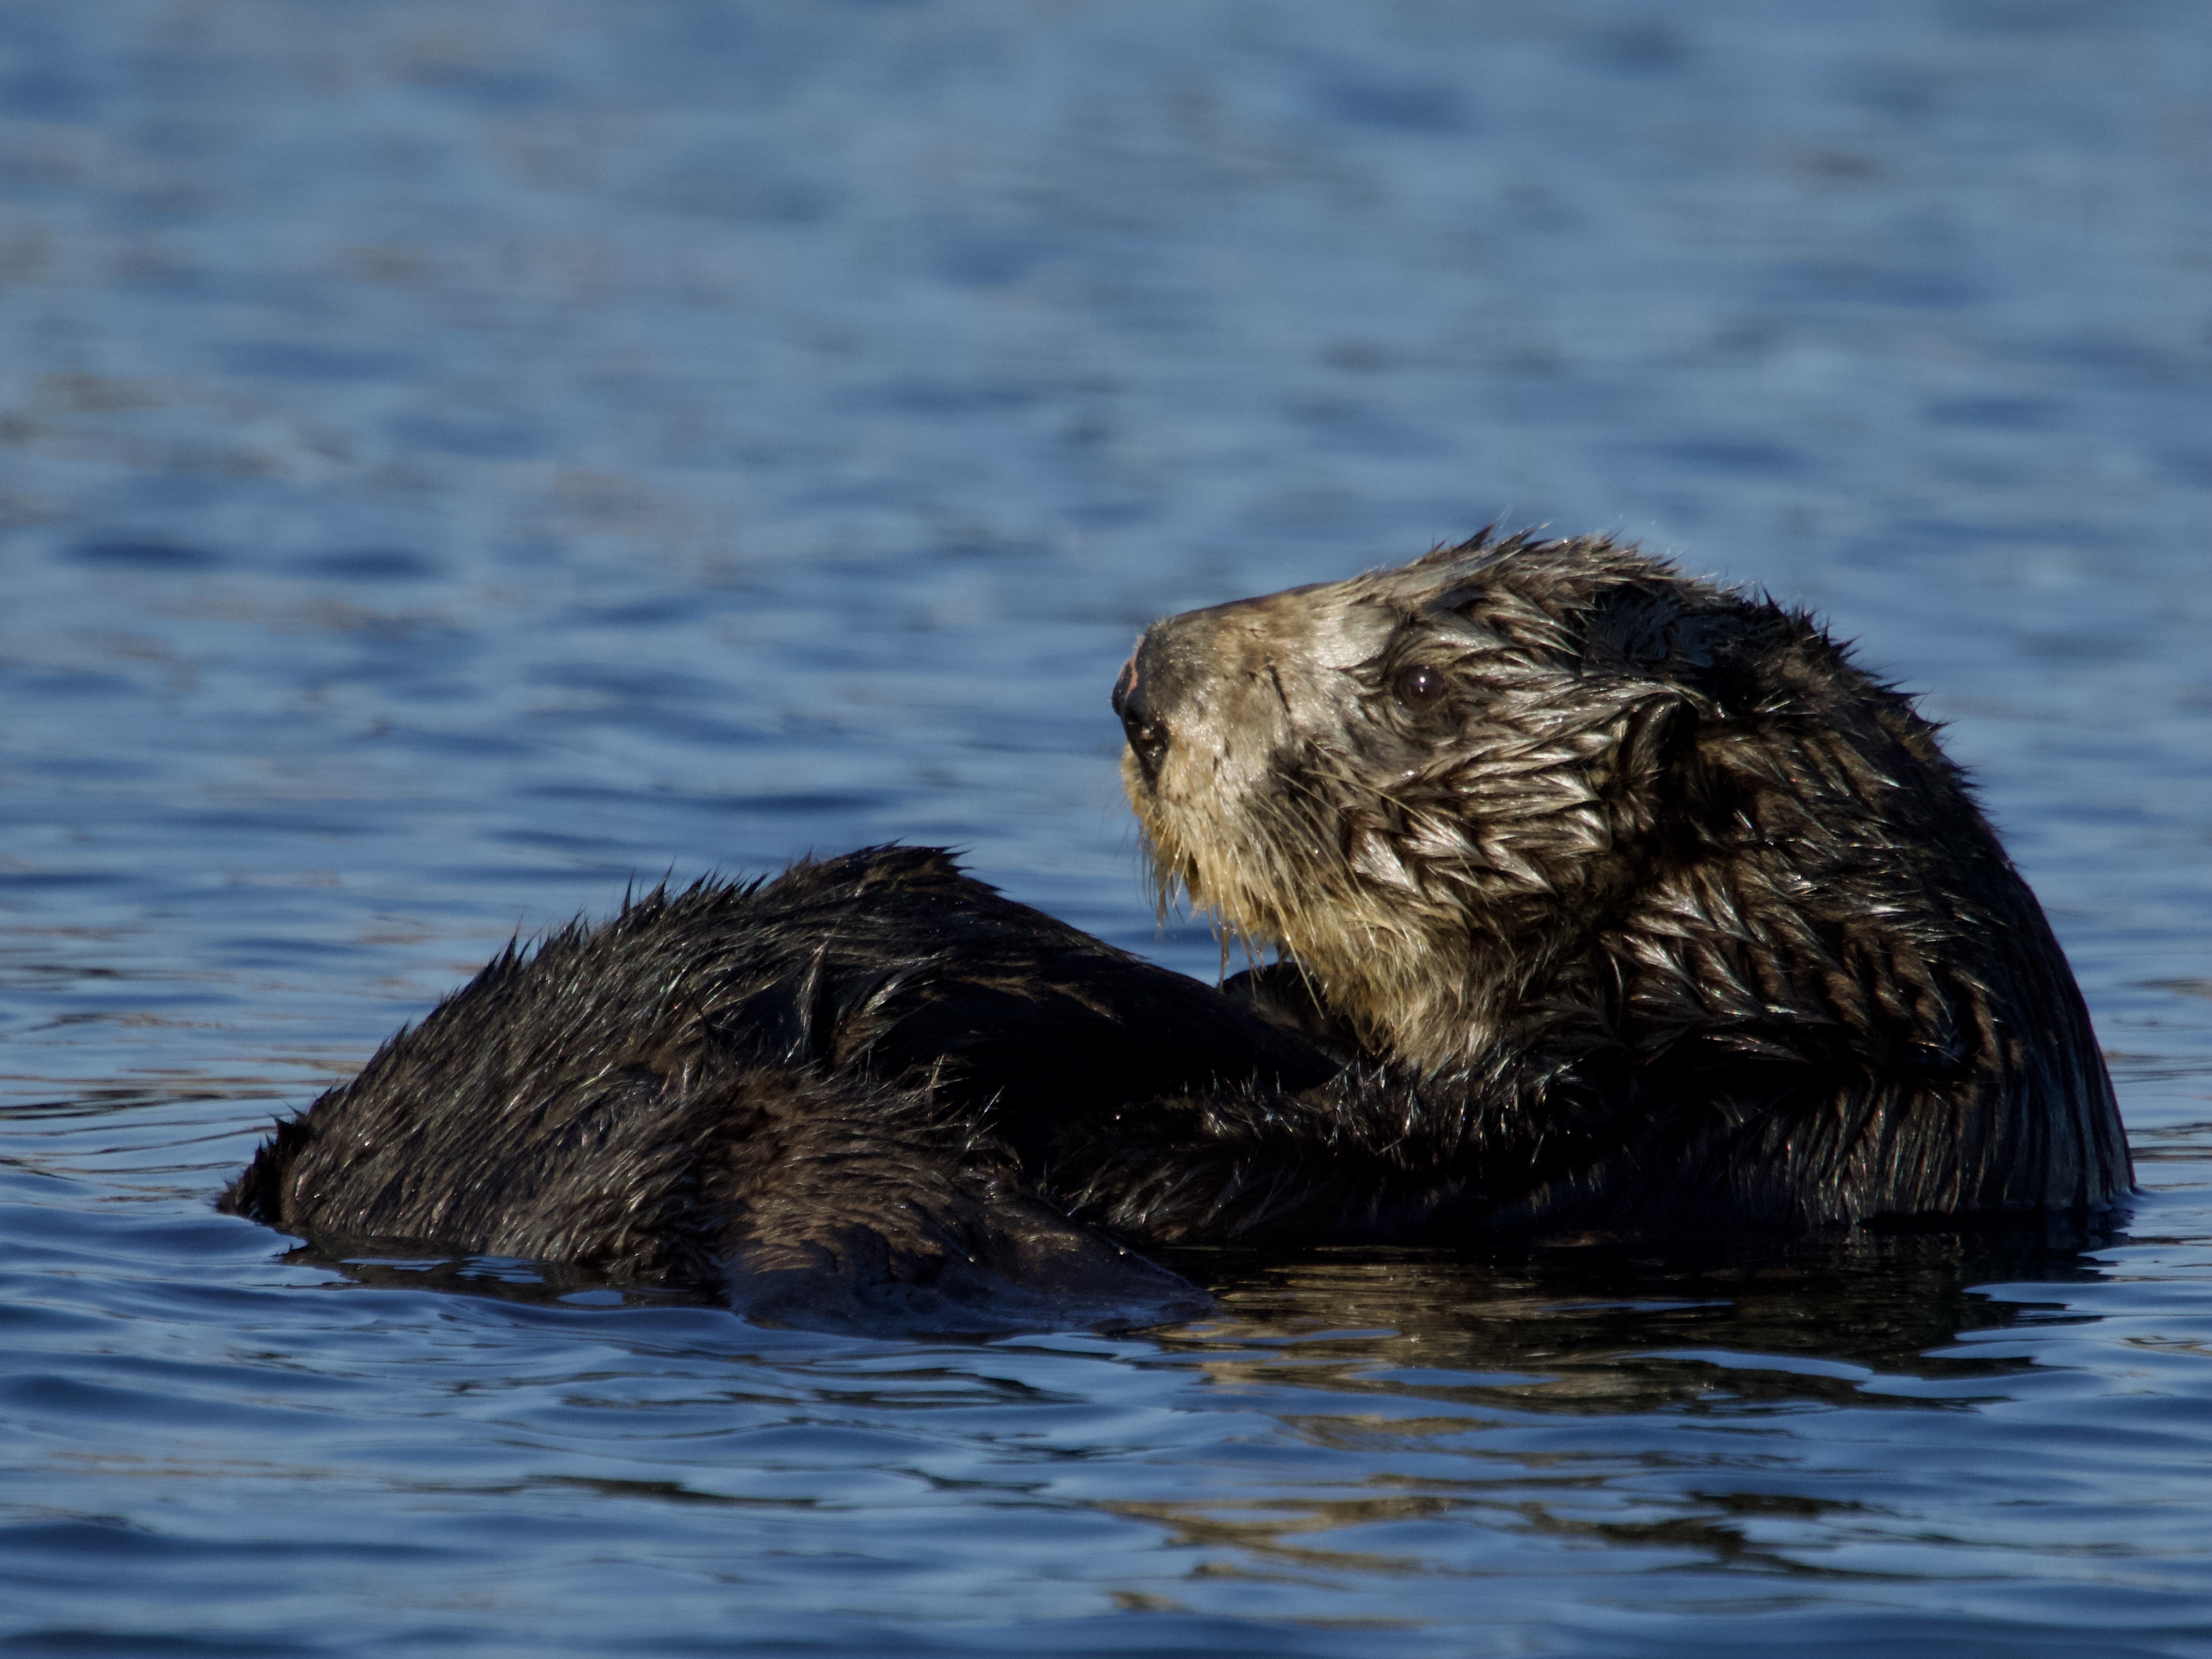 Southern Sea Otter in Monterey